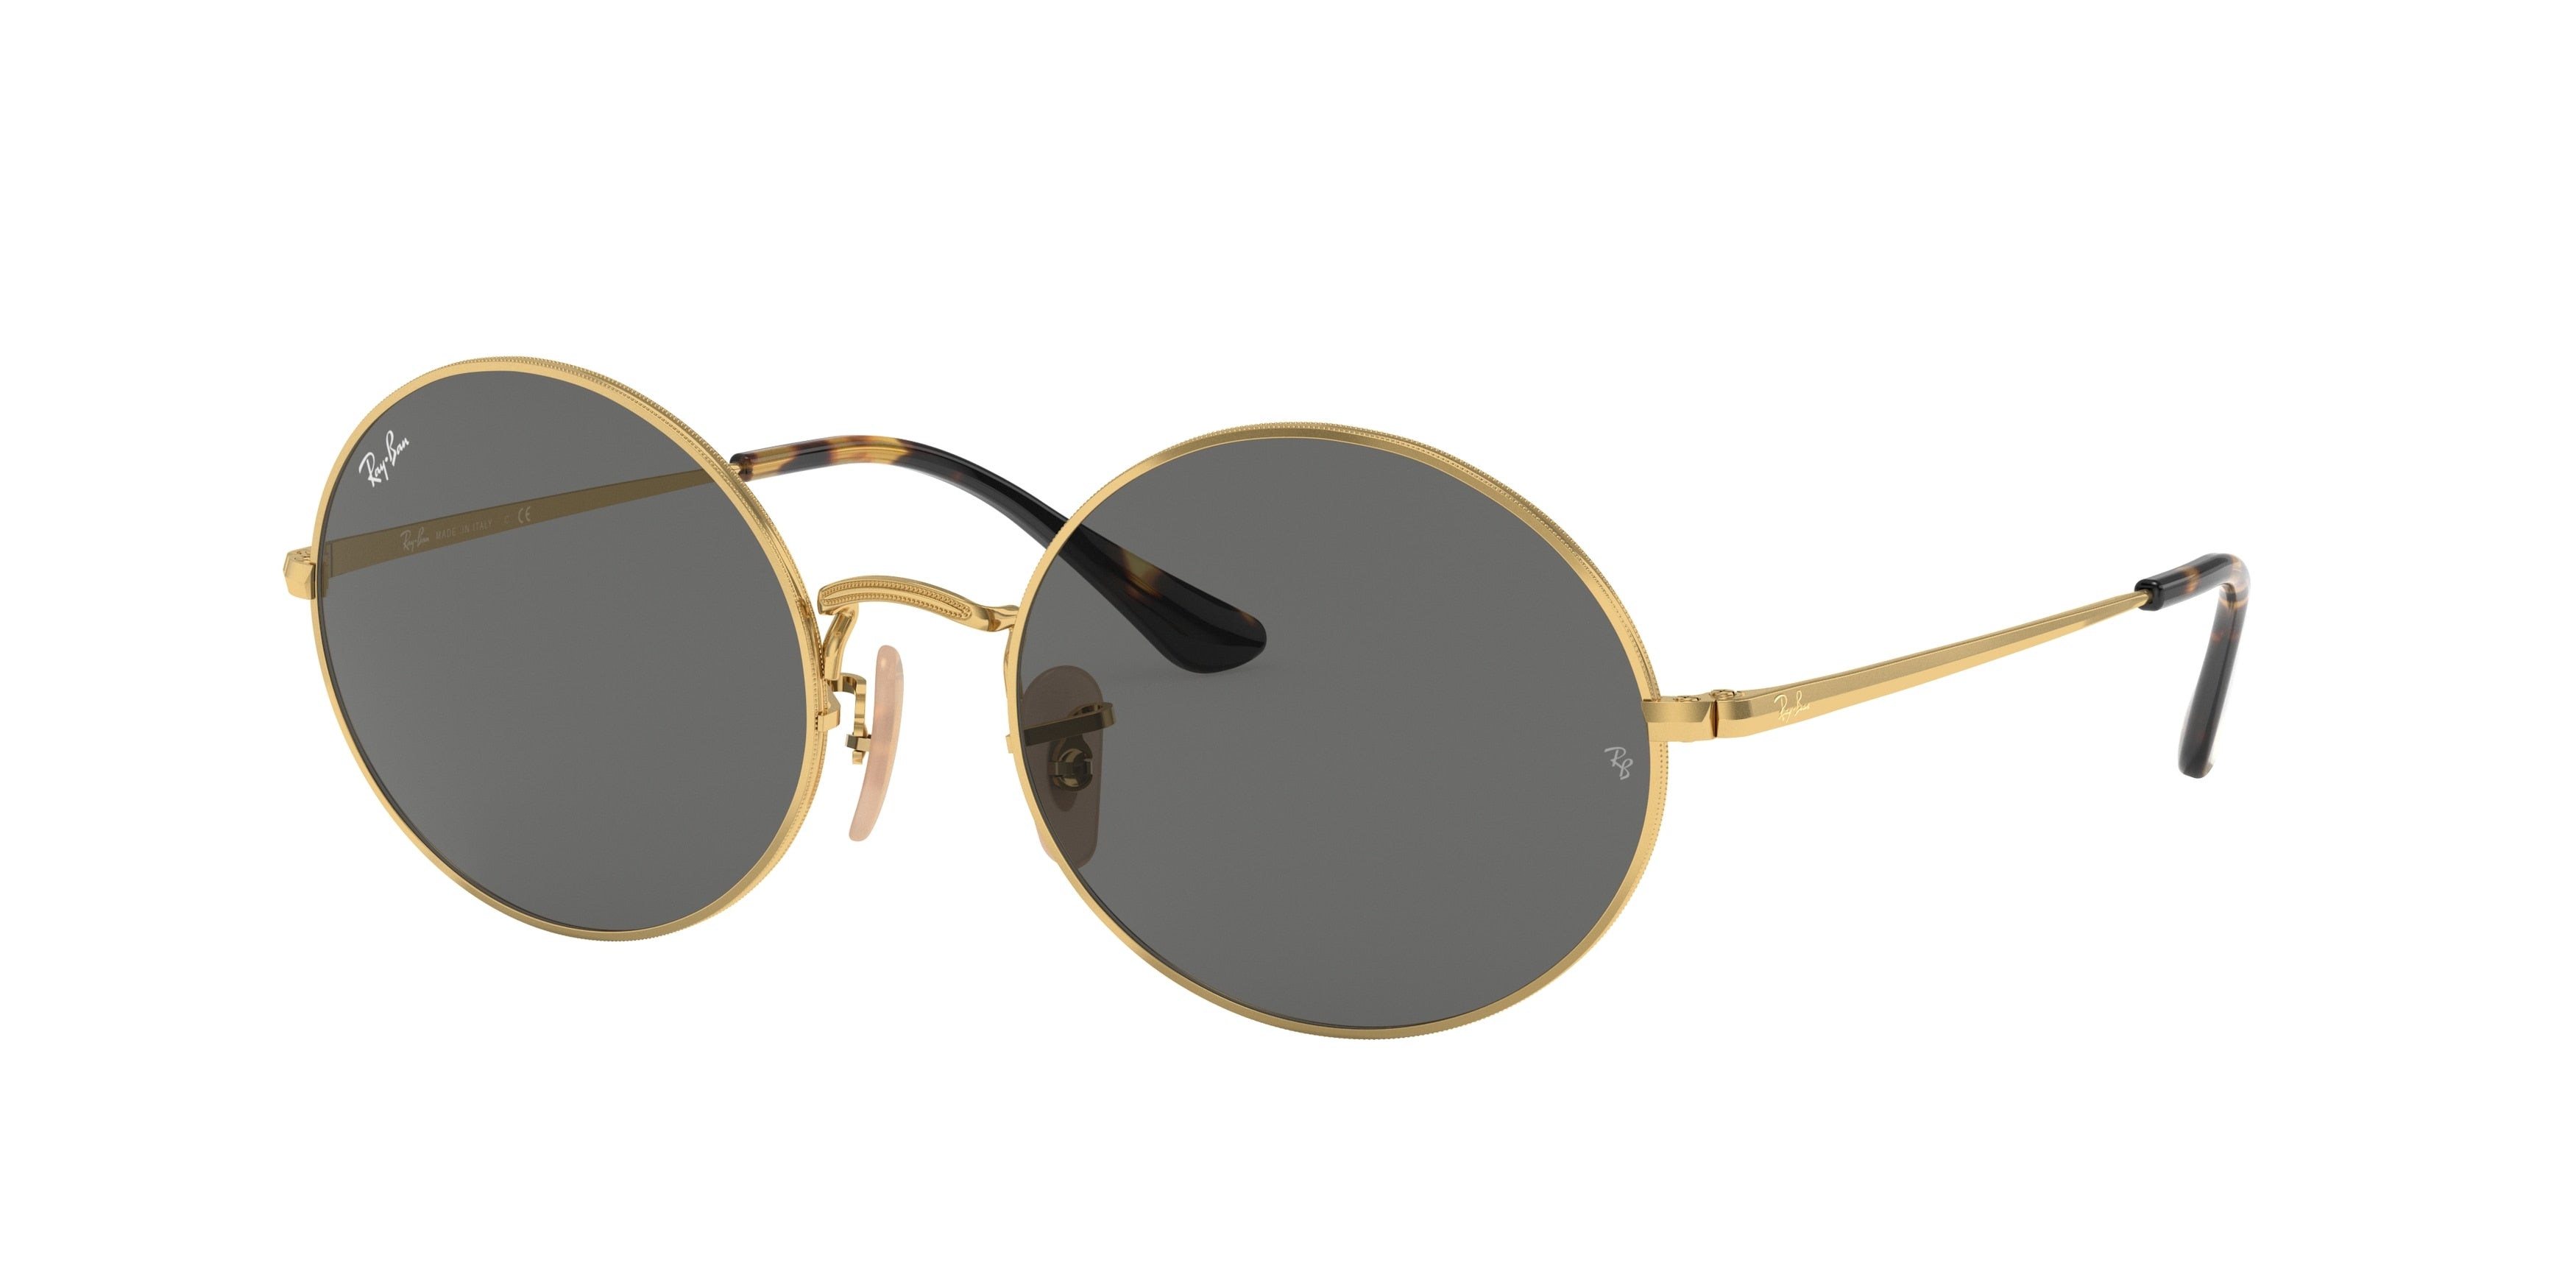 Ray-Ban OVAL RB1970 Oval Sunglasses  9150B1-Gold 53-145-19 - Color Map Gold